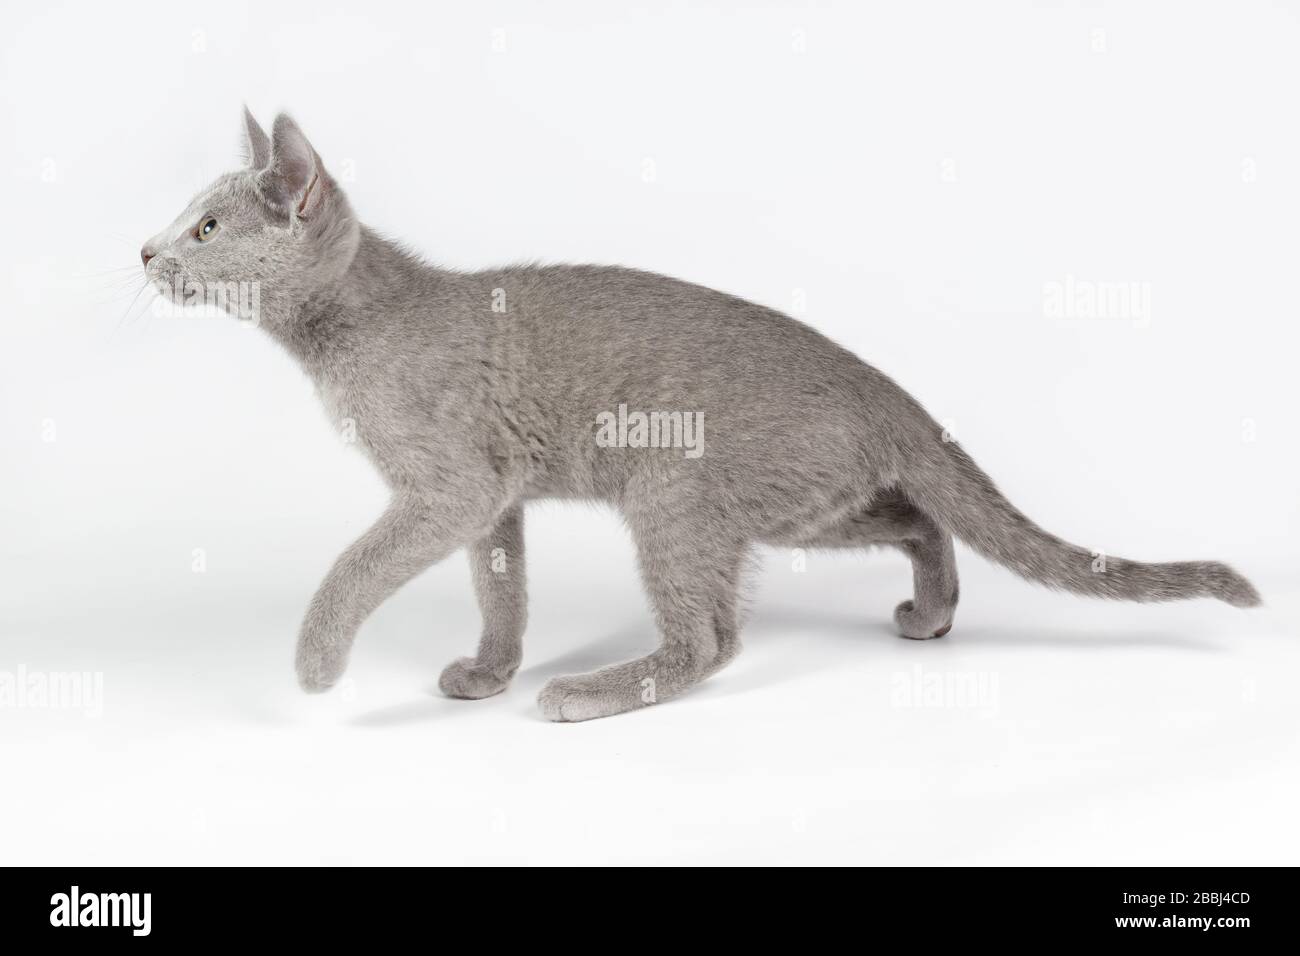 Studio photography of a Russian blue cat on colored backgrounds Stock Photo